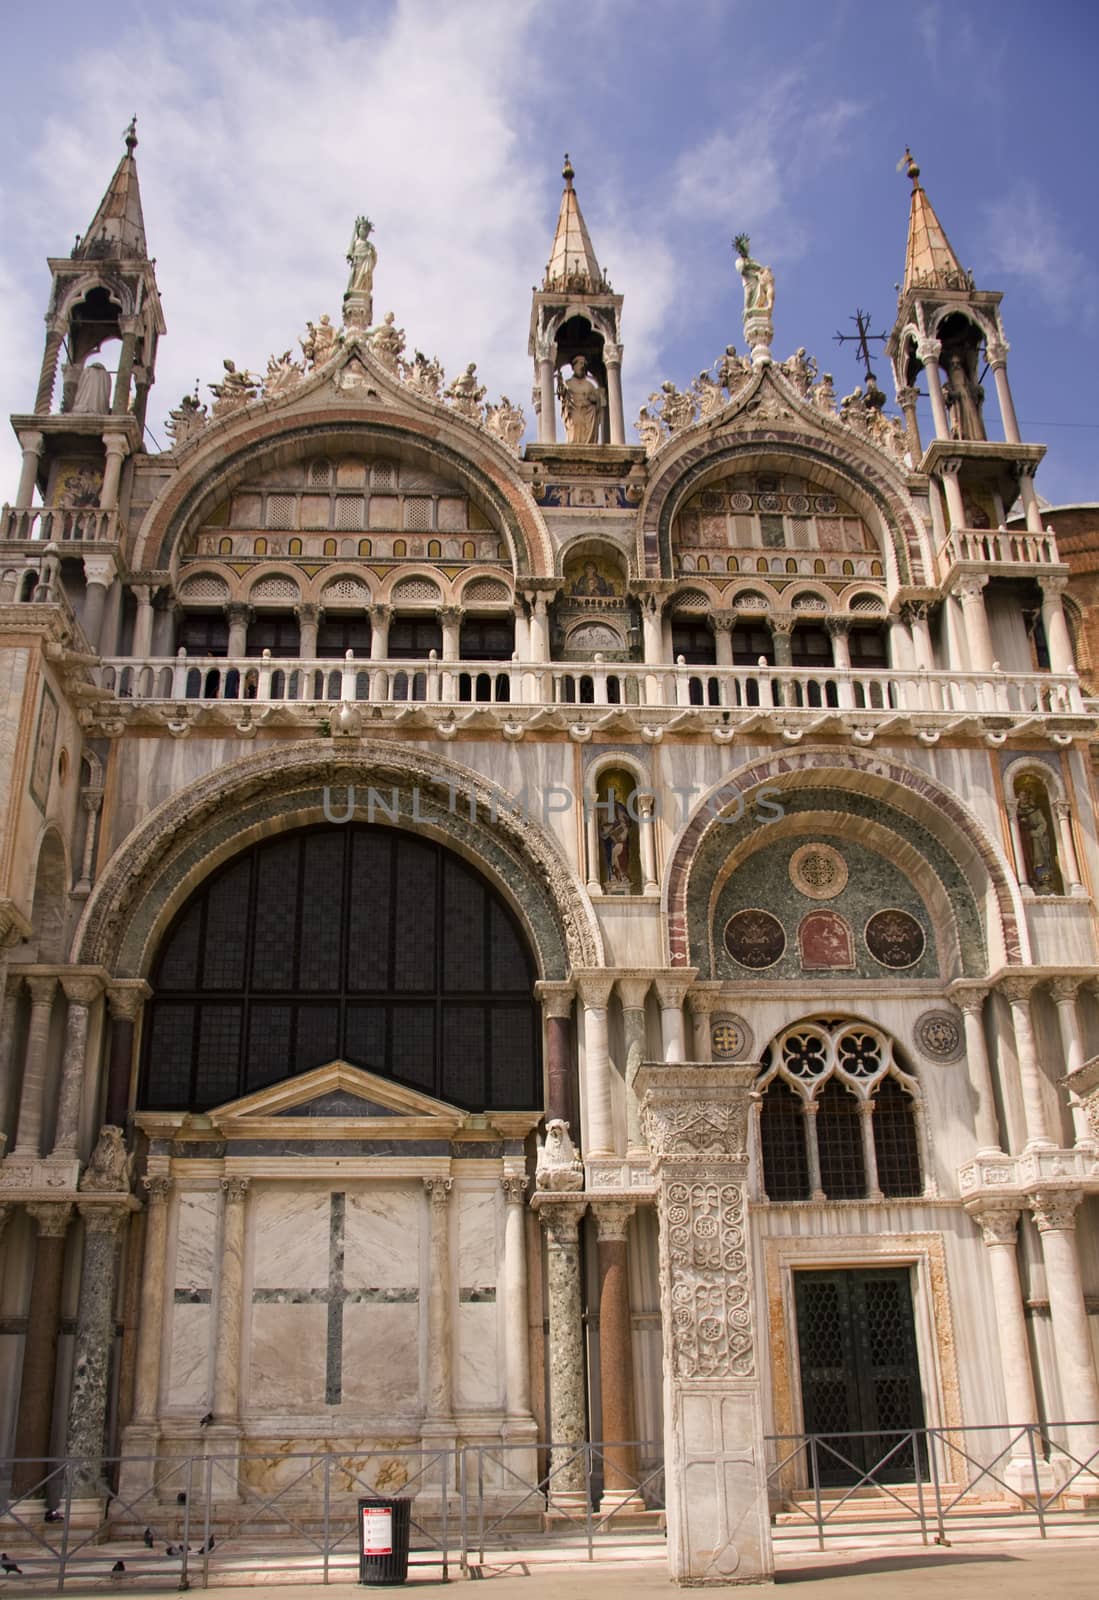 Cathedral in Venice, Saint Mark Place, Italy